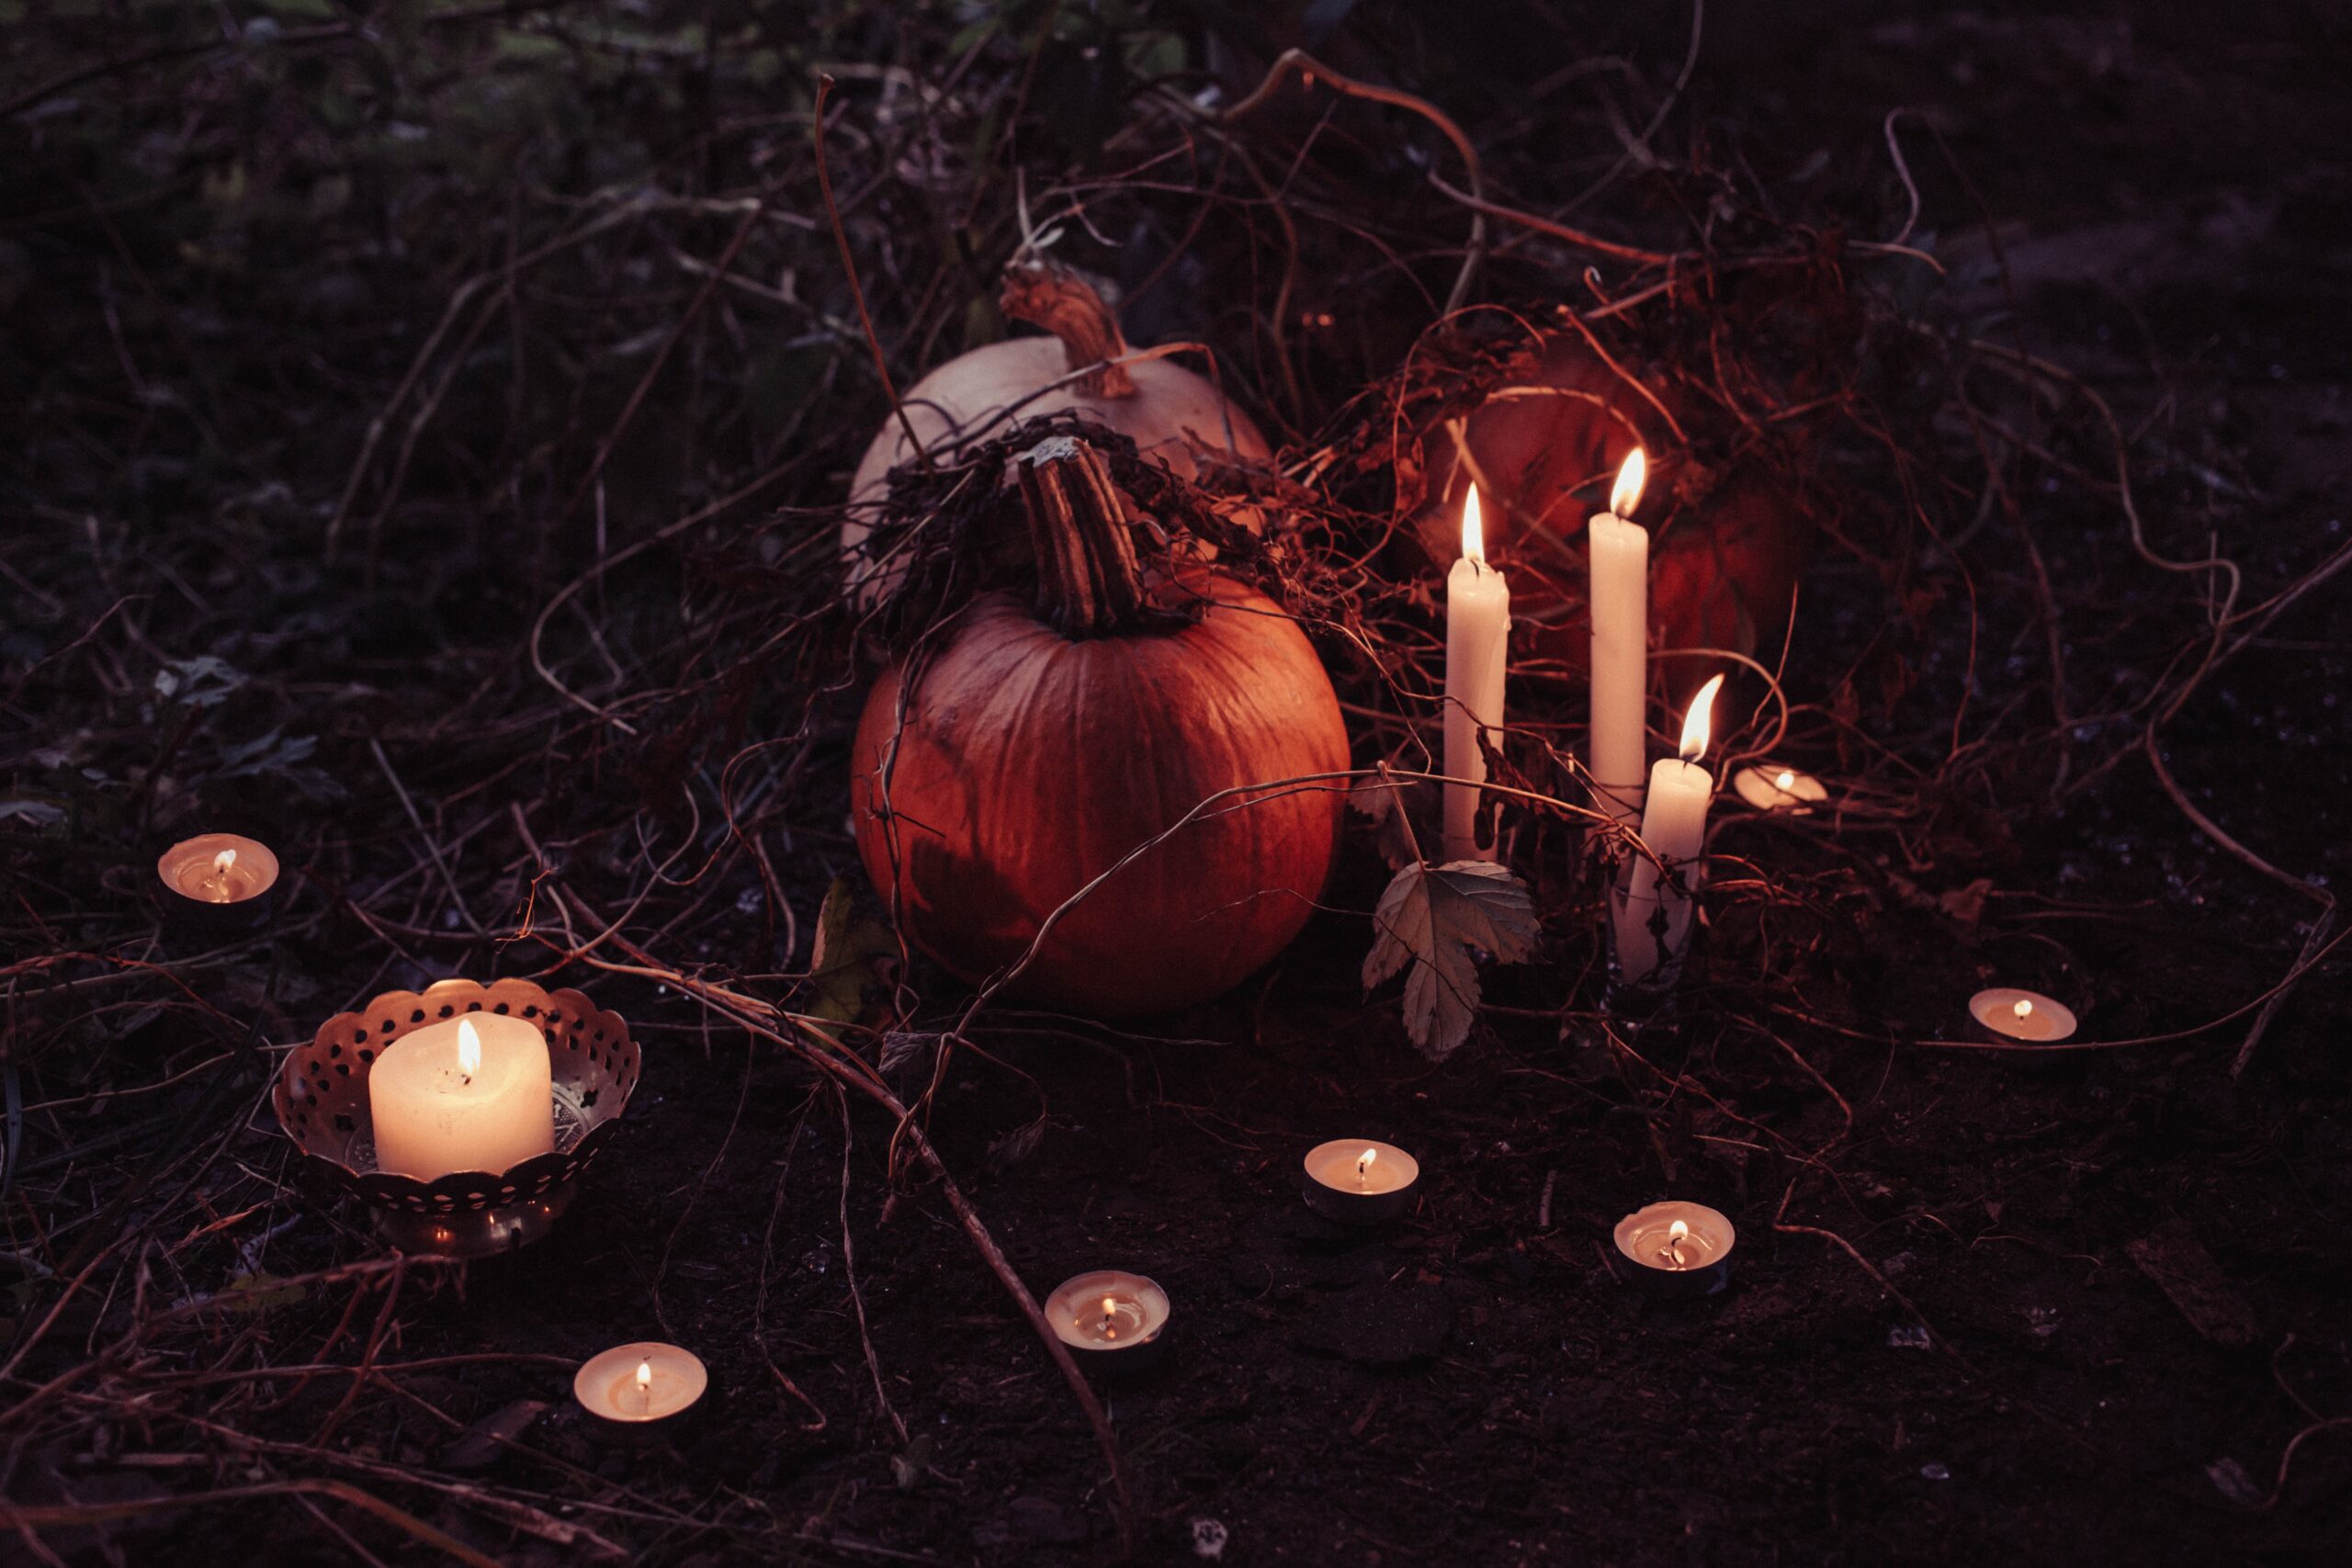 A spooky setting with two pumpkins outside and candles